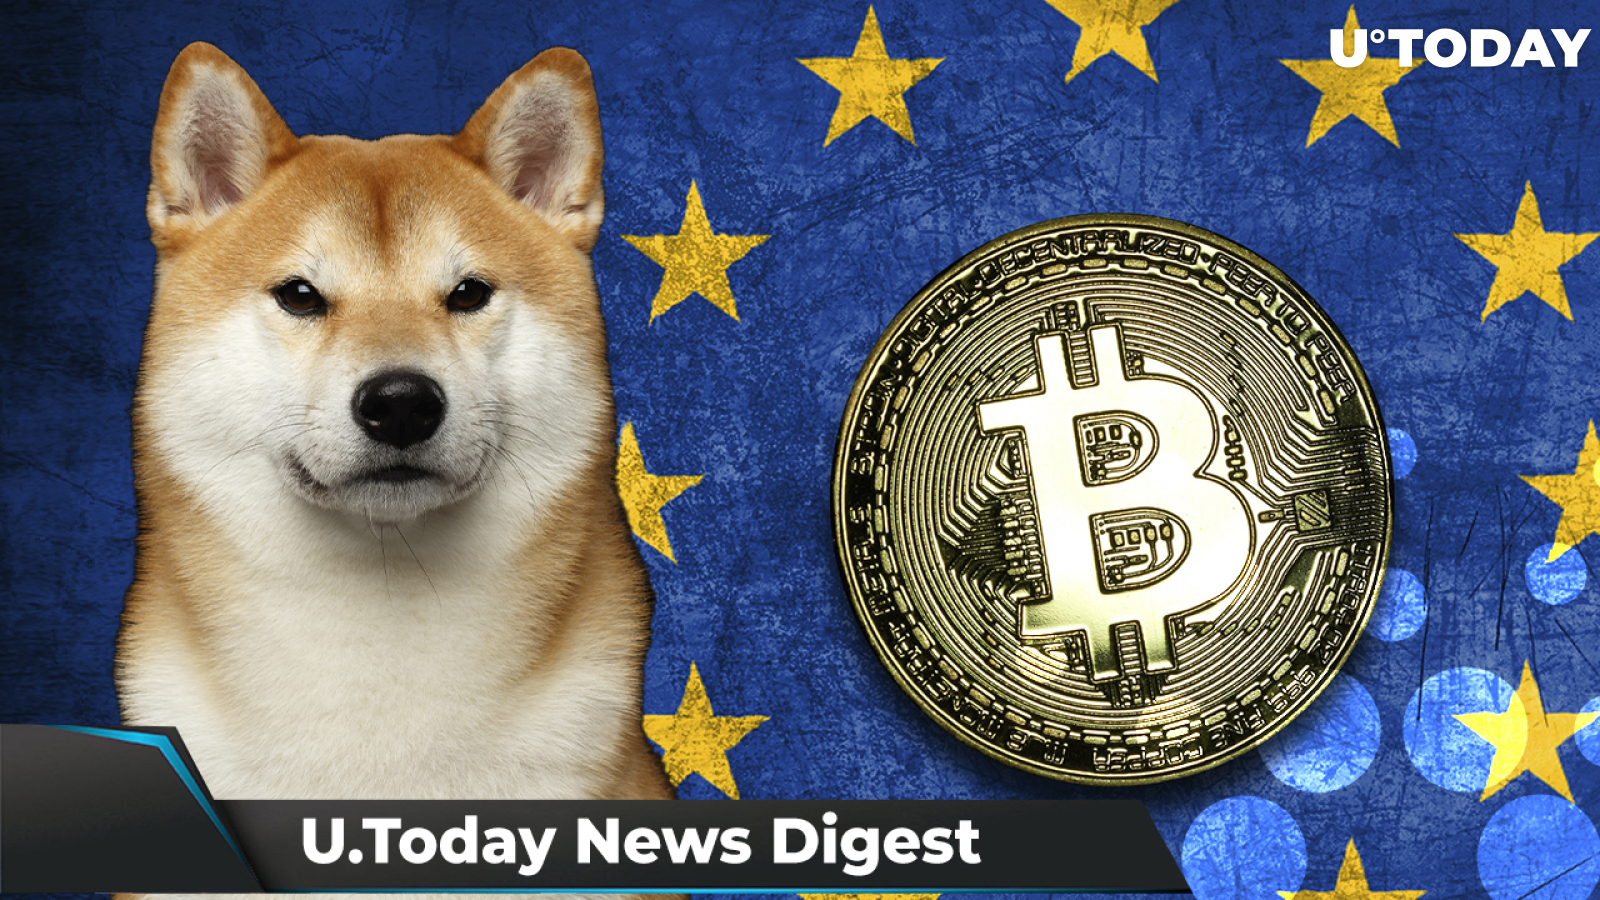 EU Lawmakers Vote Against BTC Ban, Two Factors Will Help SHIB Spike to $0.01, Cardano’s TVL Hits New Highs: Crypto News Digest by U.Today